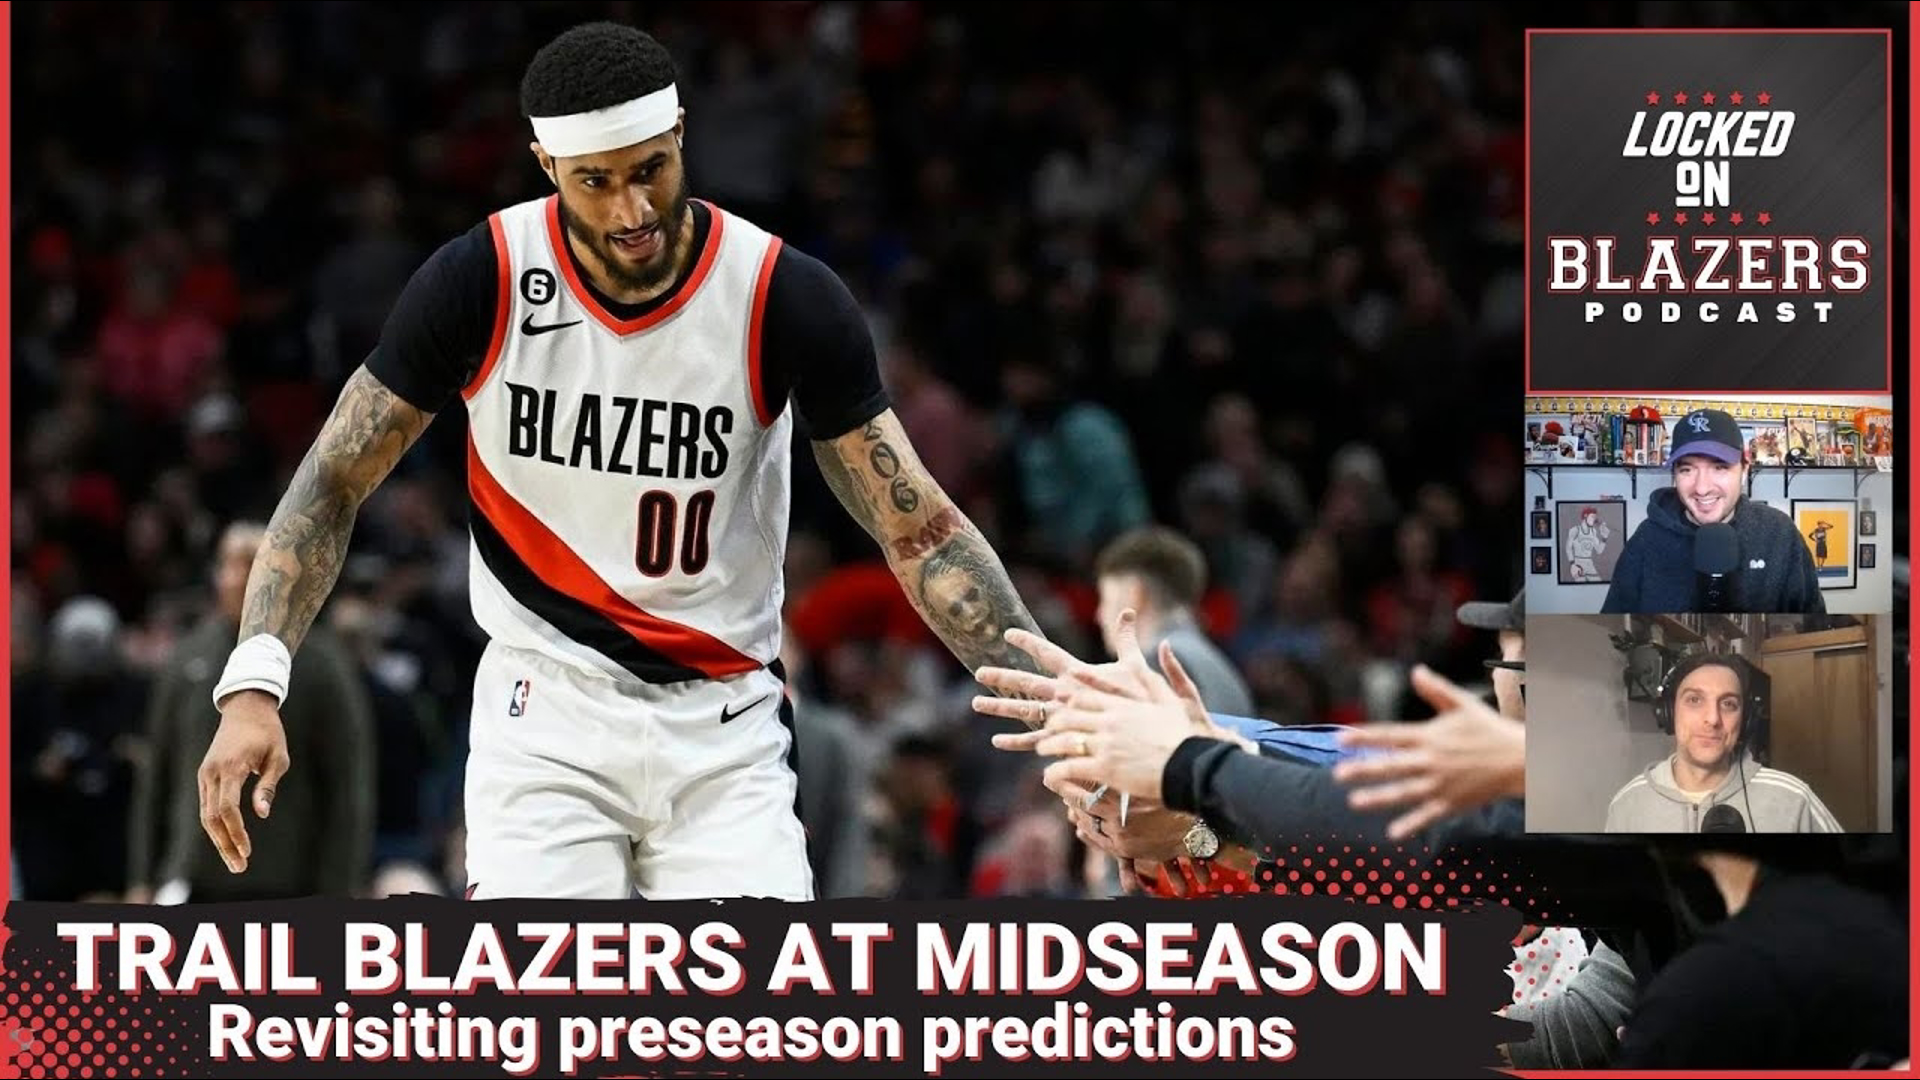 Locked On Blazers revisits their preseason predictions, now that the Portland Trail Blazers are past the midway point of their season.